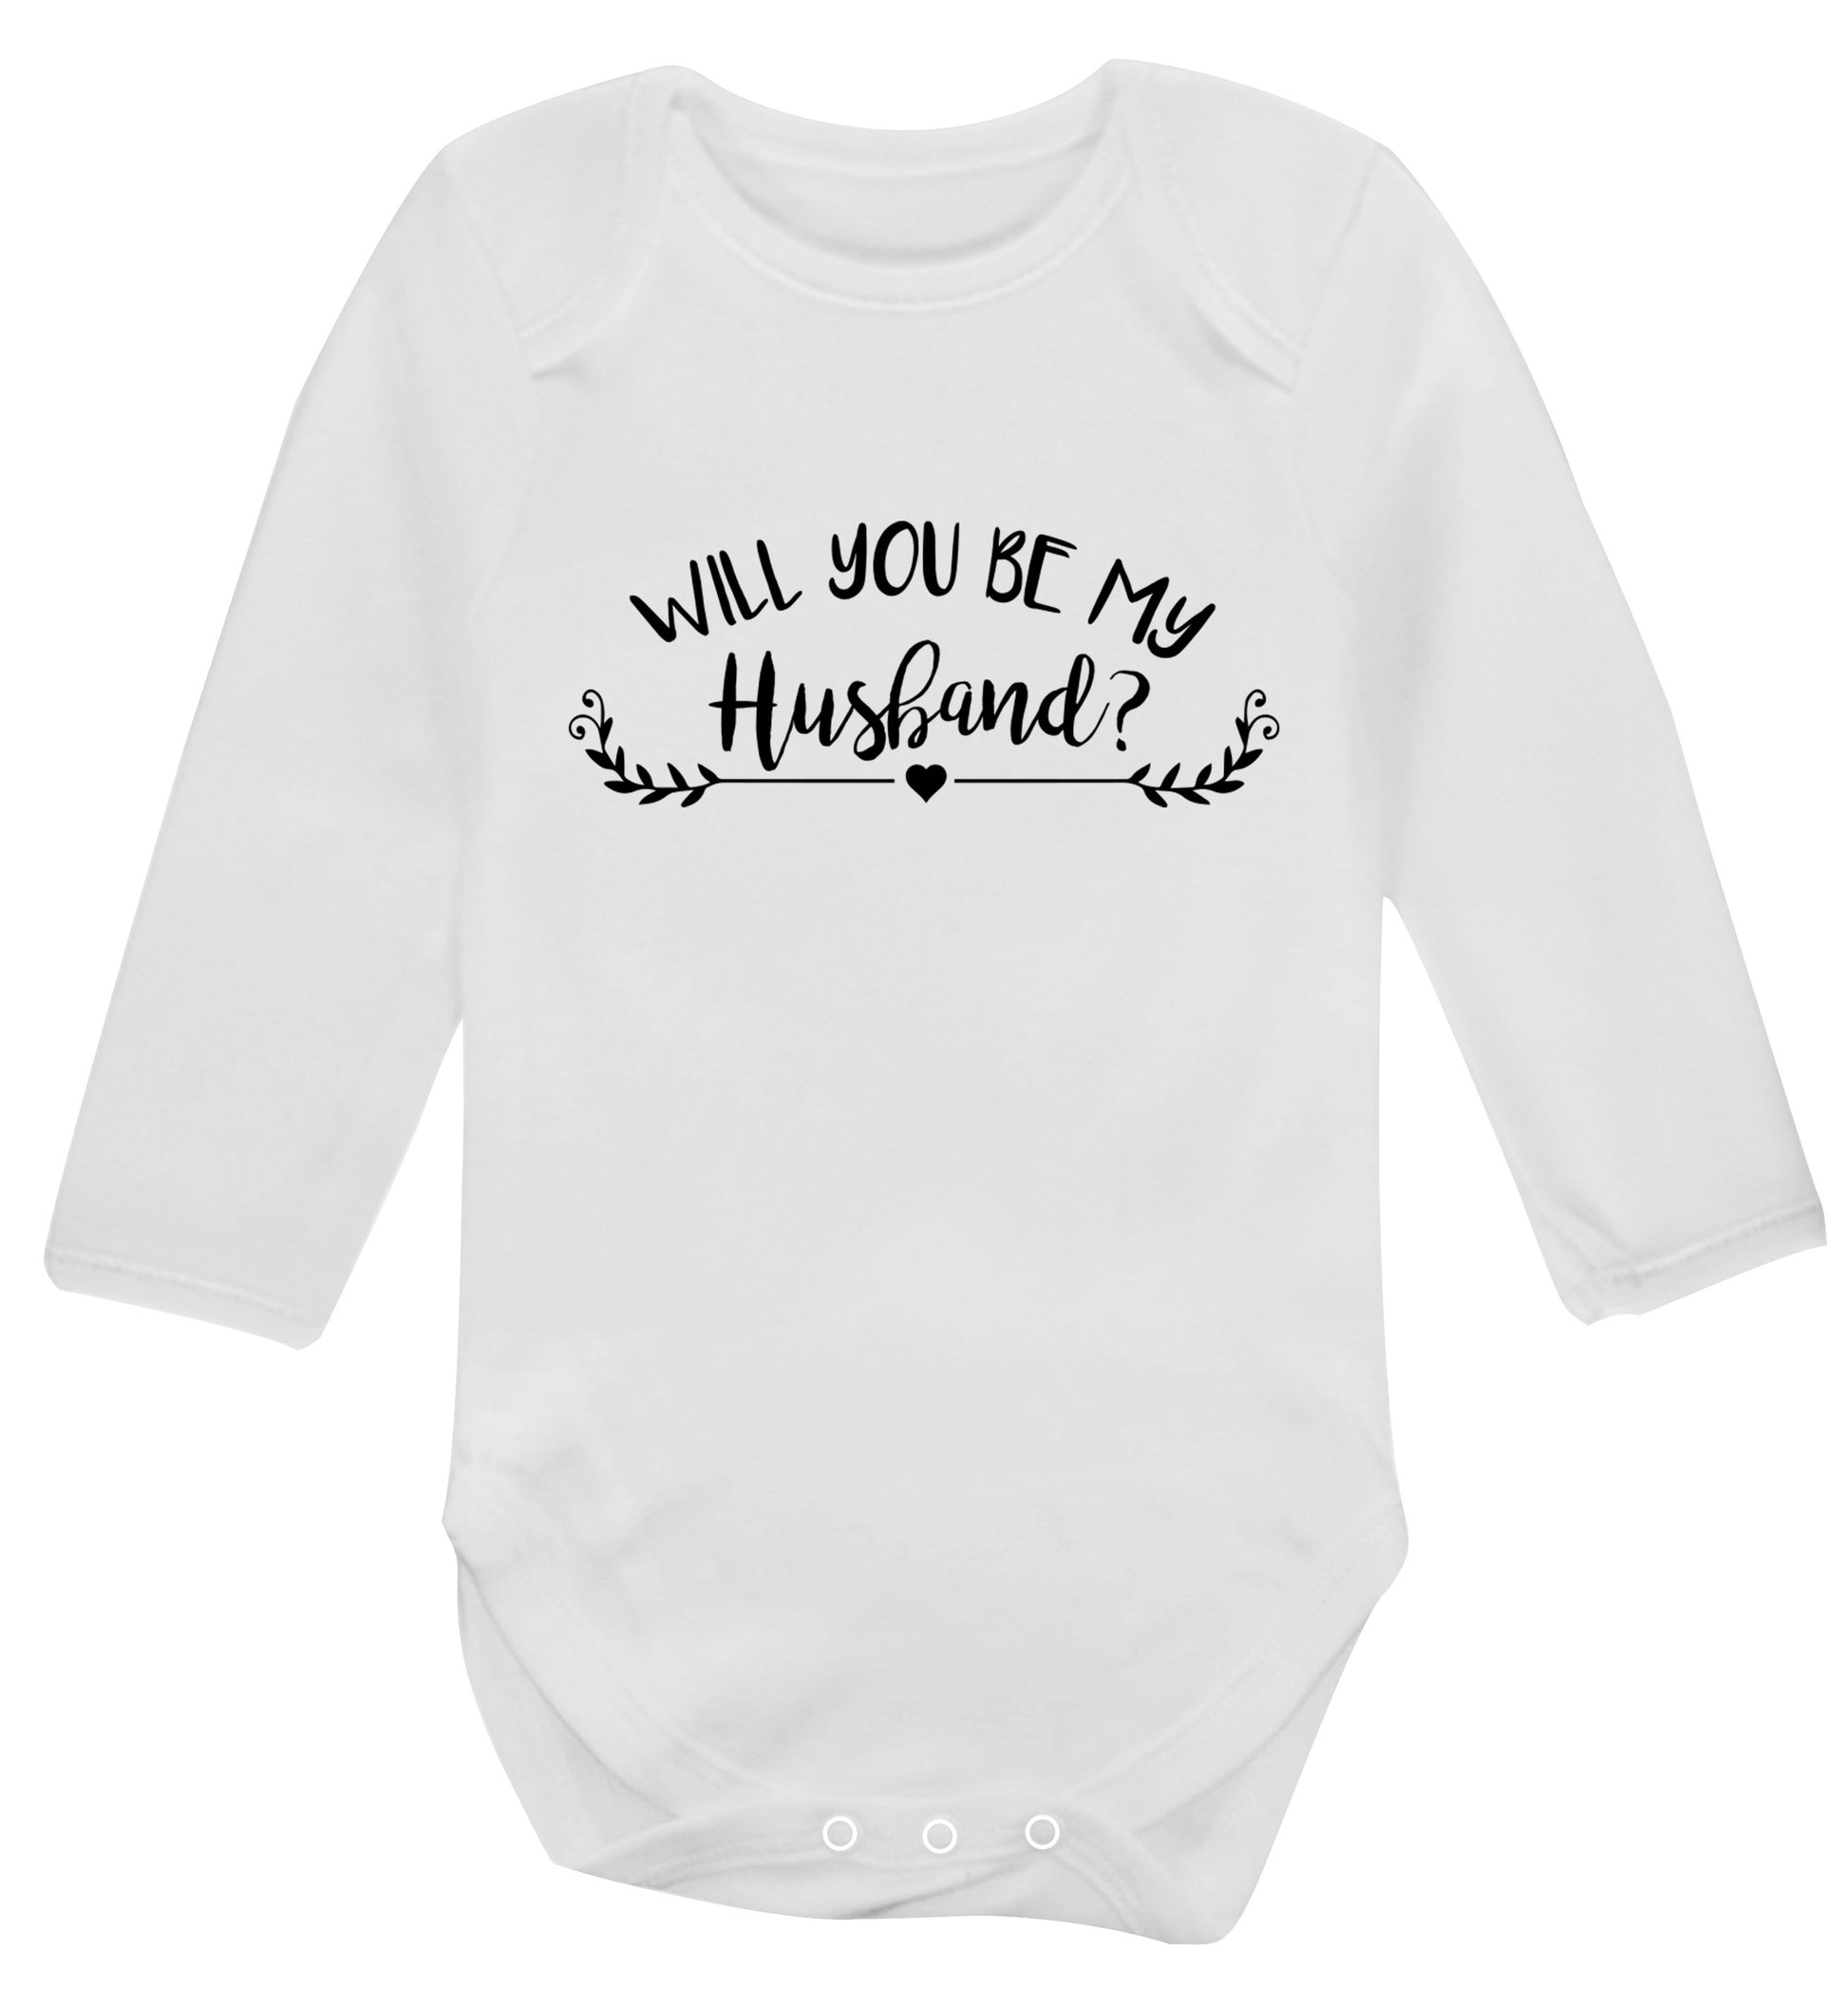 Will you be my husband? Baby Vest long sleeved white 6-12 months